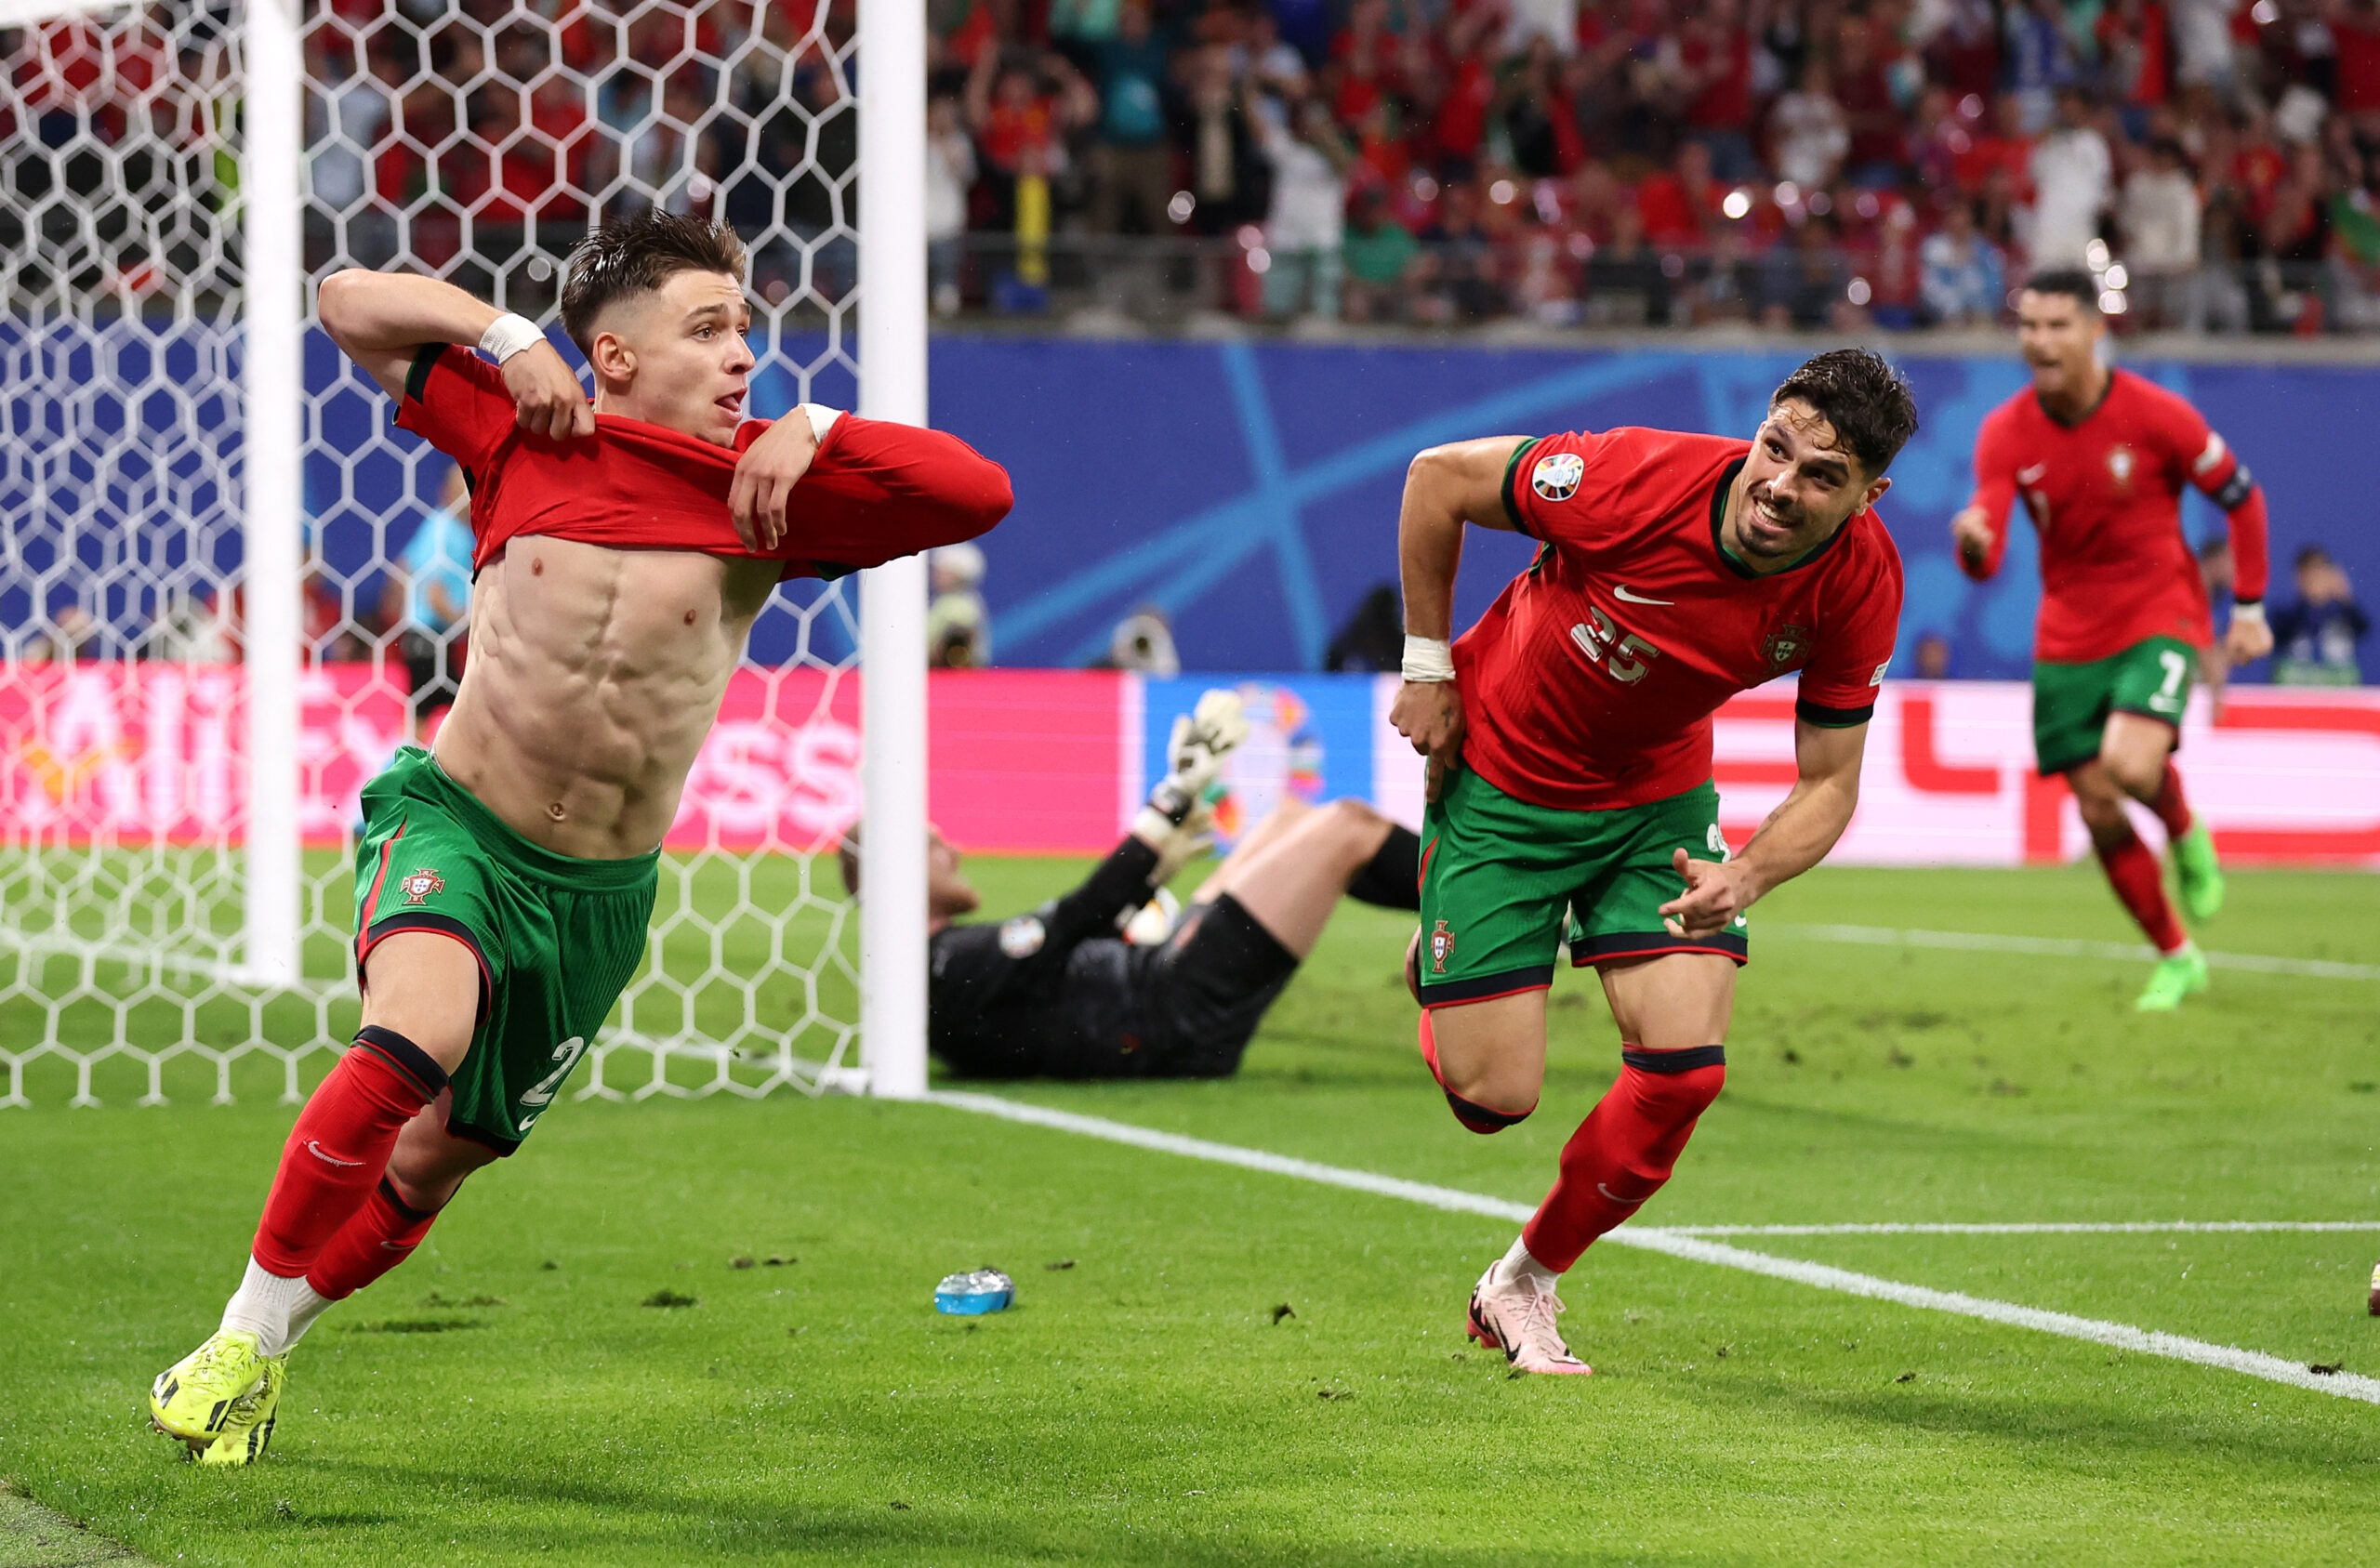 Portugal 2-1 Czech Republic Stats: Conceição Wins It at the Death to Spare Portugal Blushes